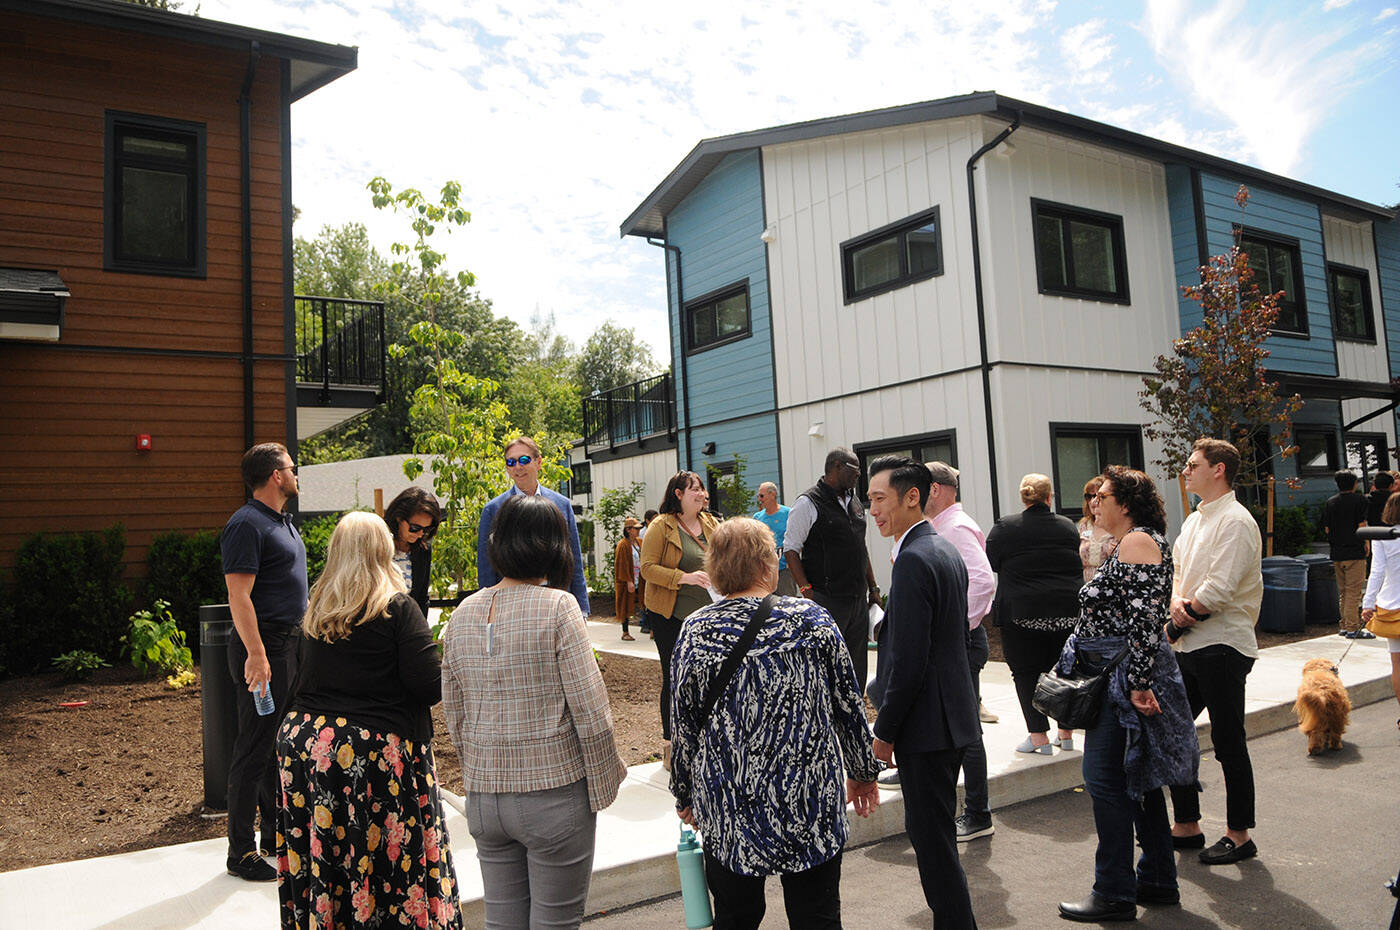 People gather outside the Tzeachten affordable housing project during the grand opening on Thursday, June 23, 2022. (Jenna Hauck/ Chilliwack Progress)